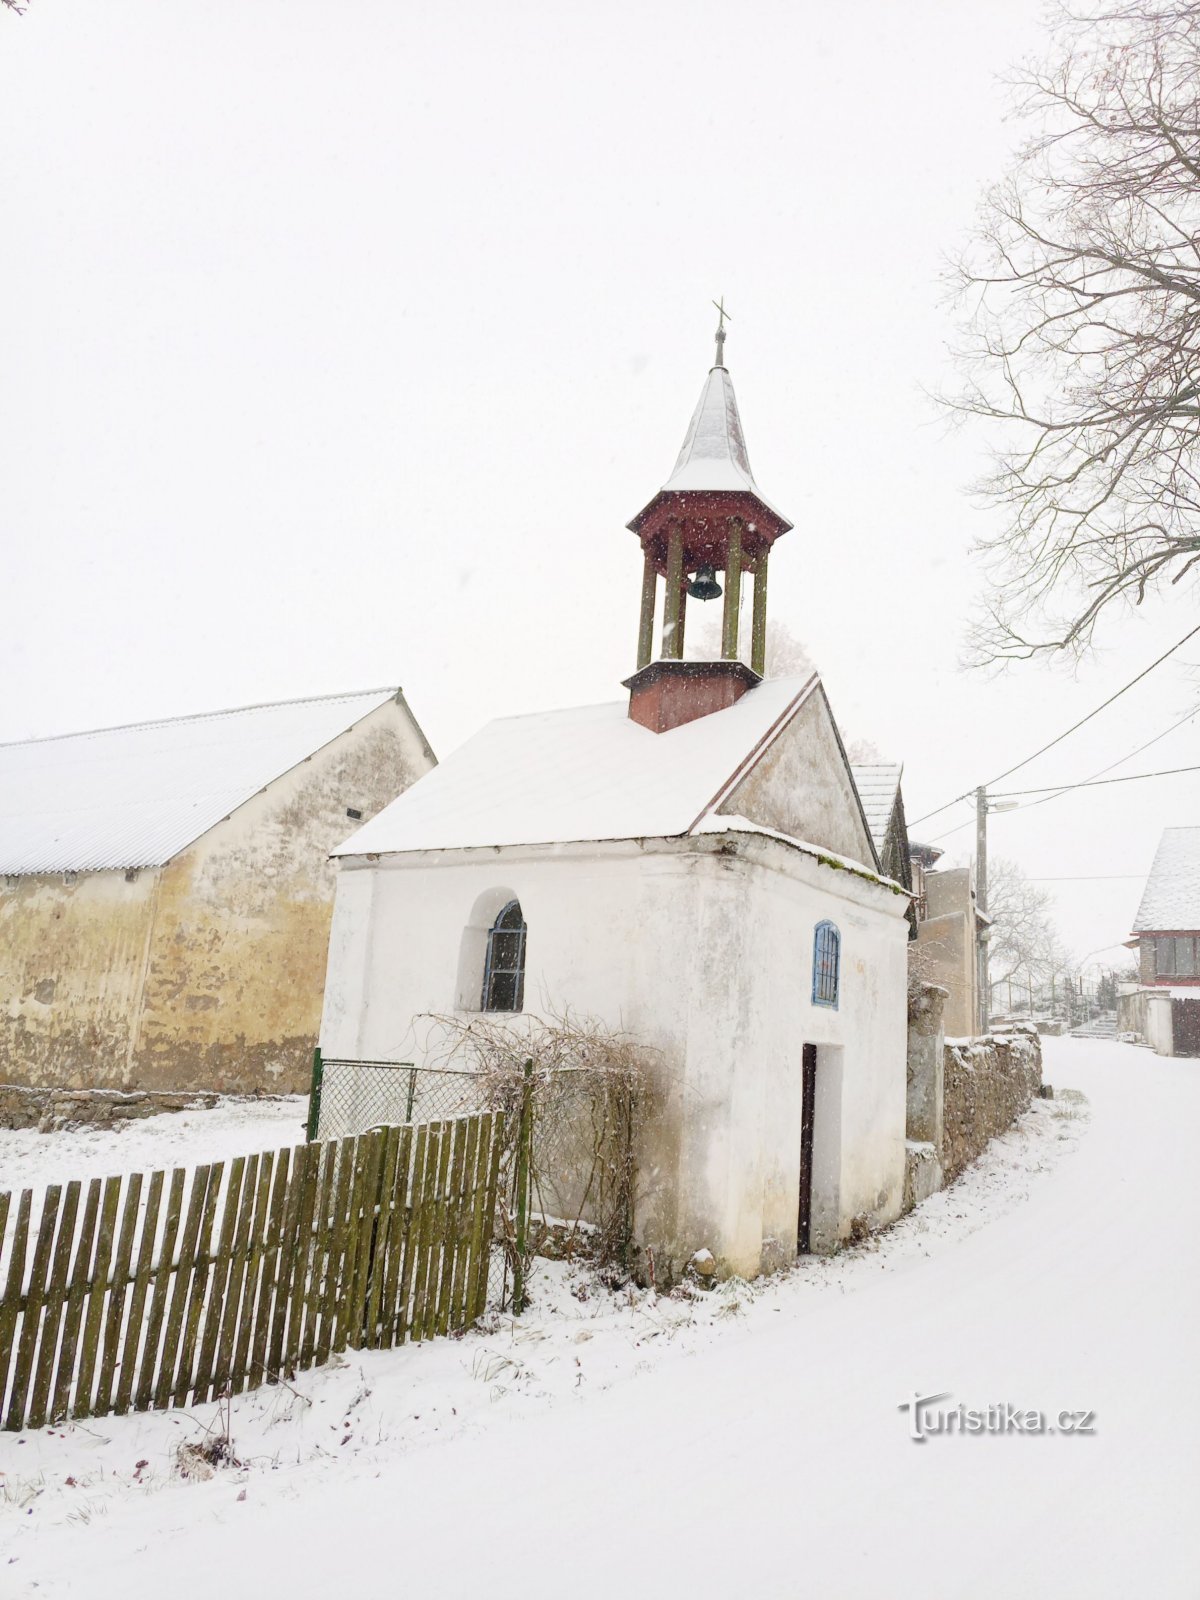 2. Chapel with a six-sided wooden belfry in Cunkov